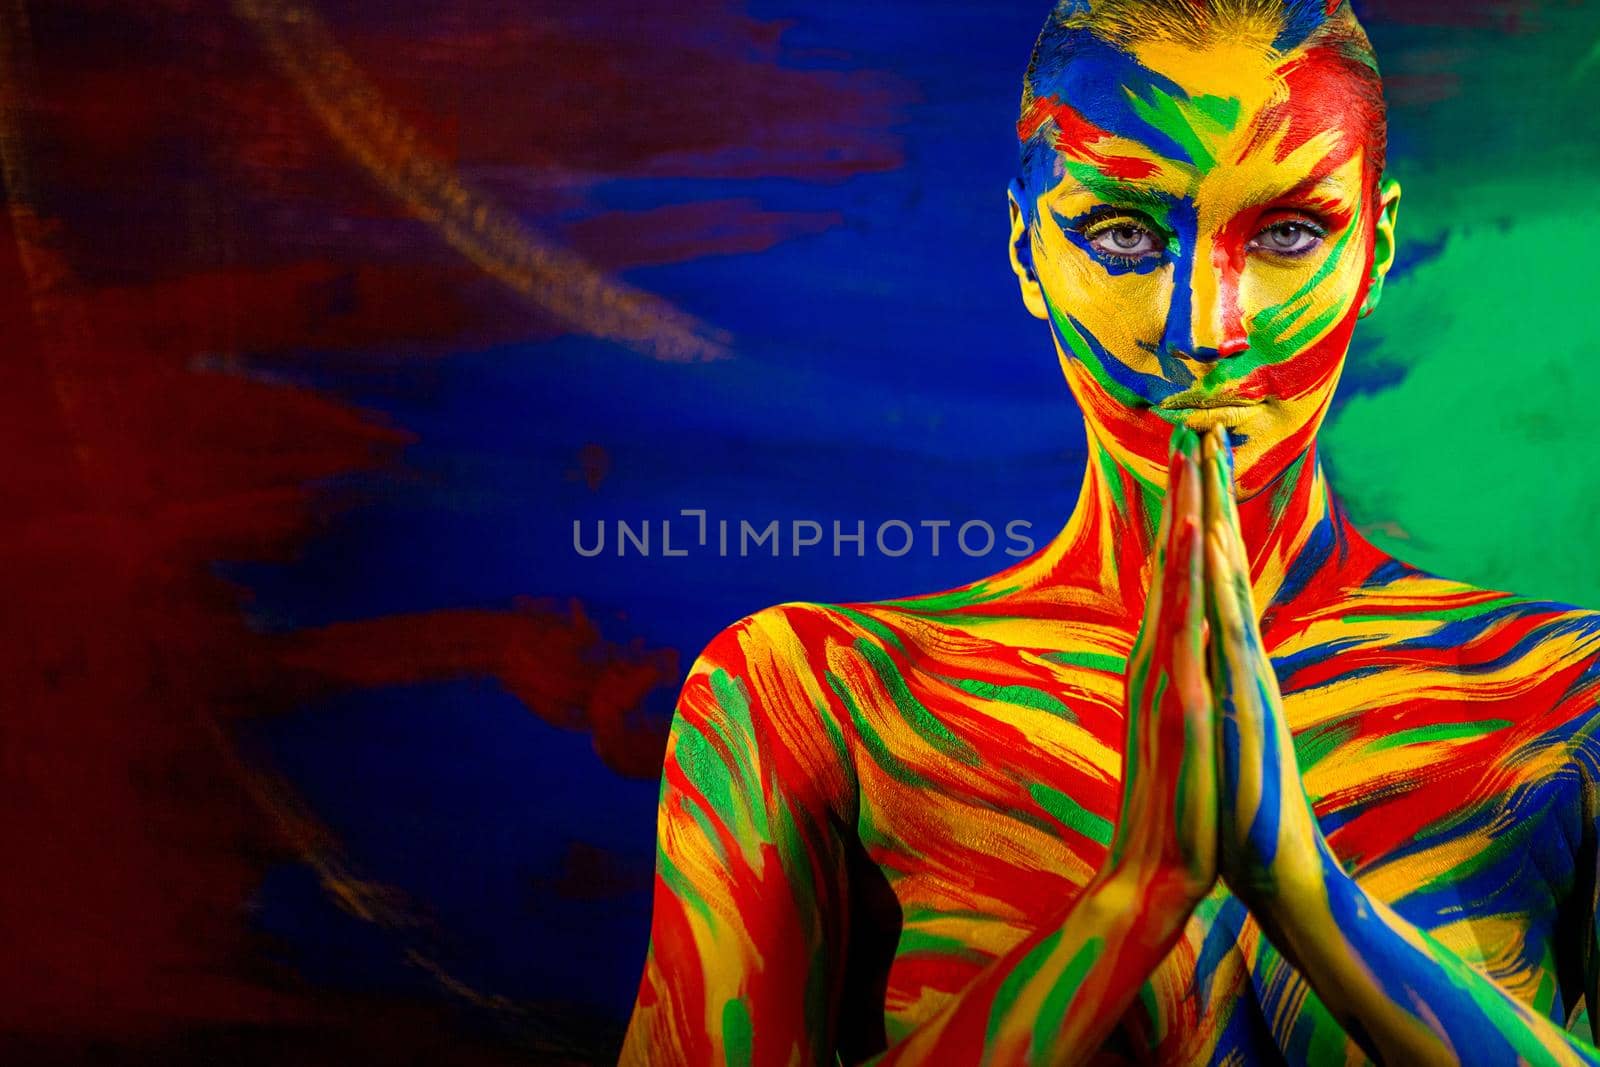 Portrait of the bright beautiful emotional woman with art make-up